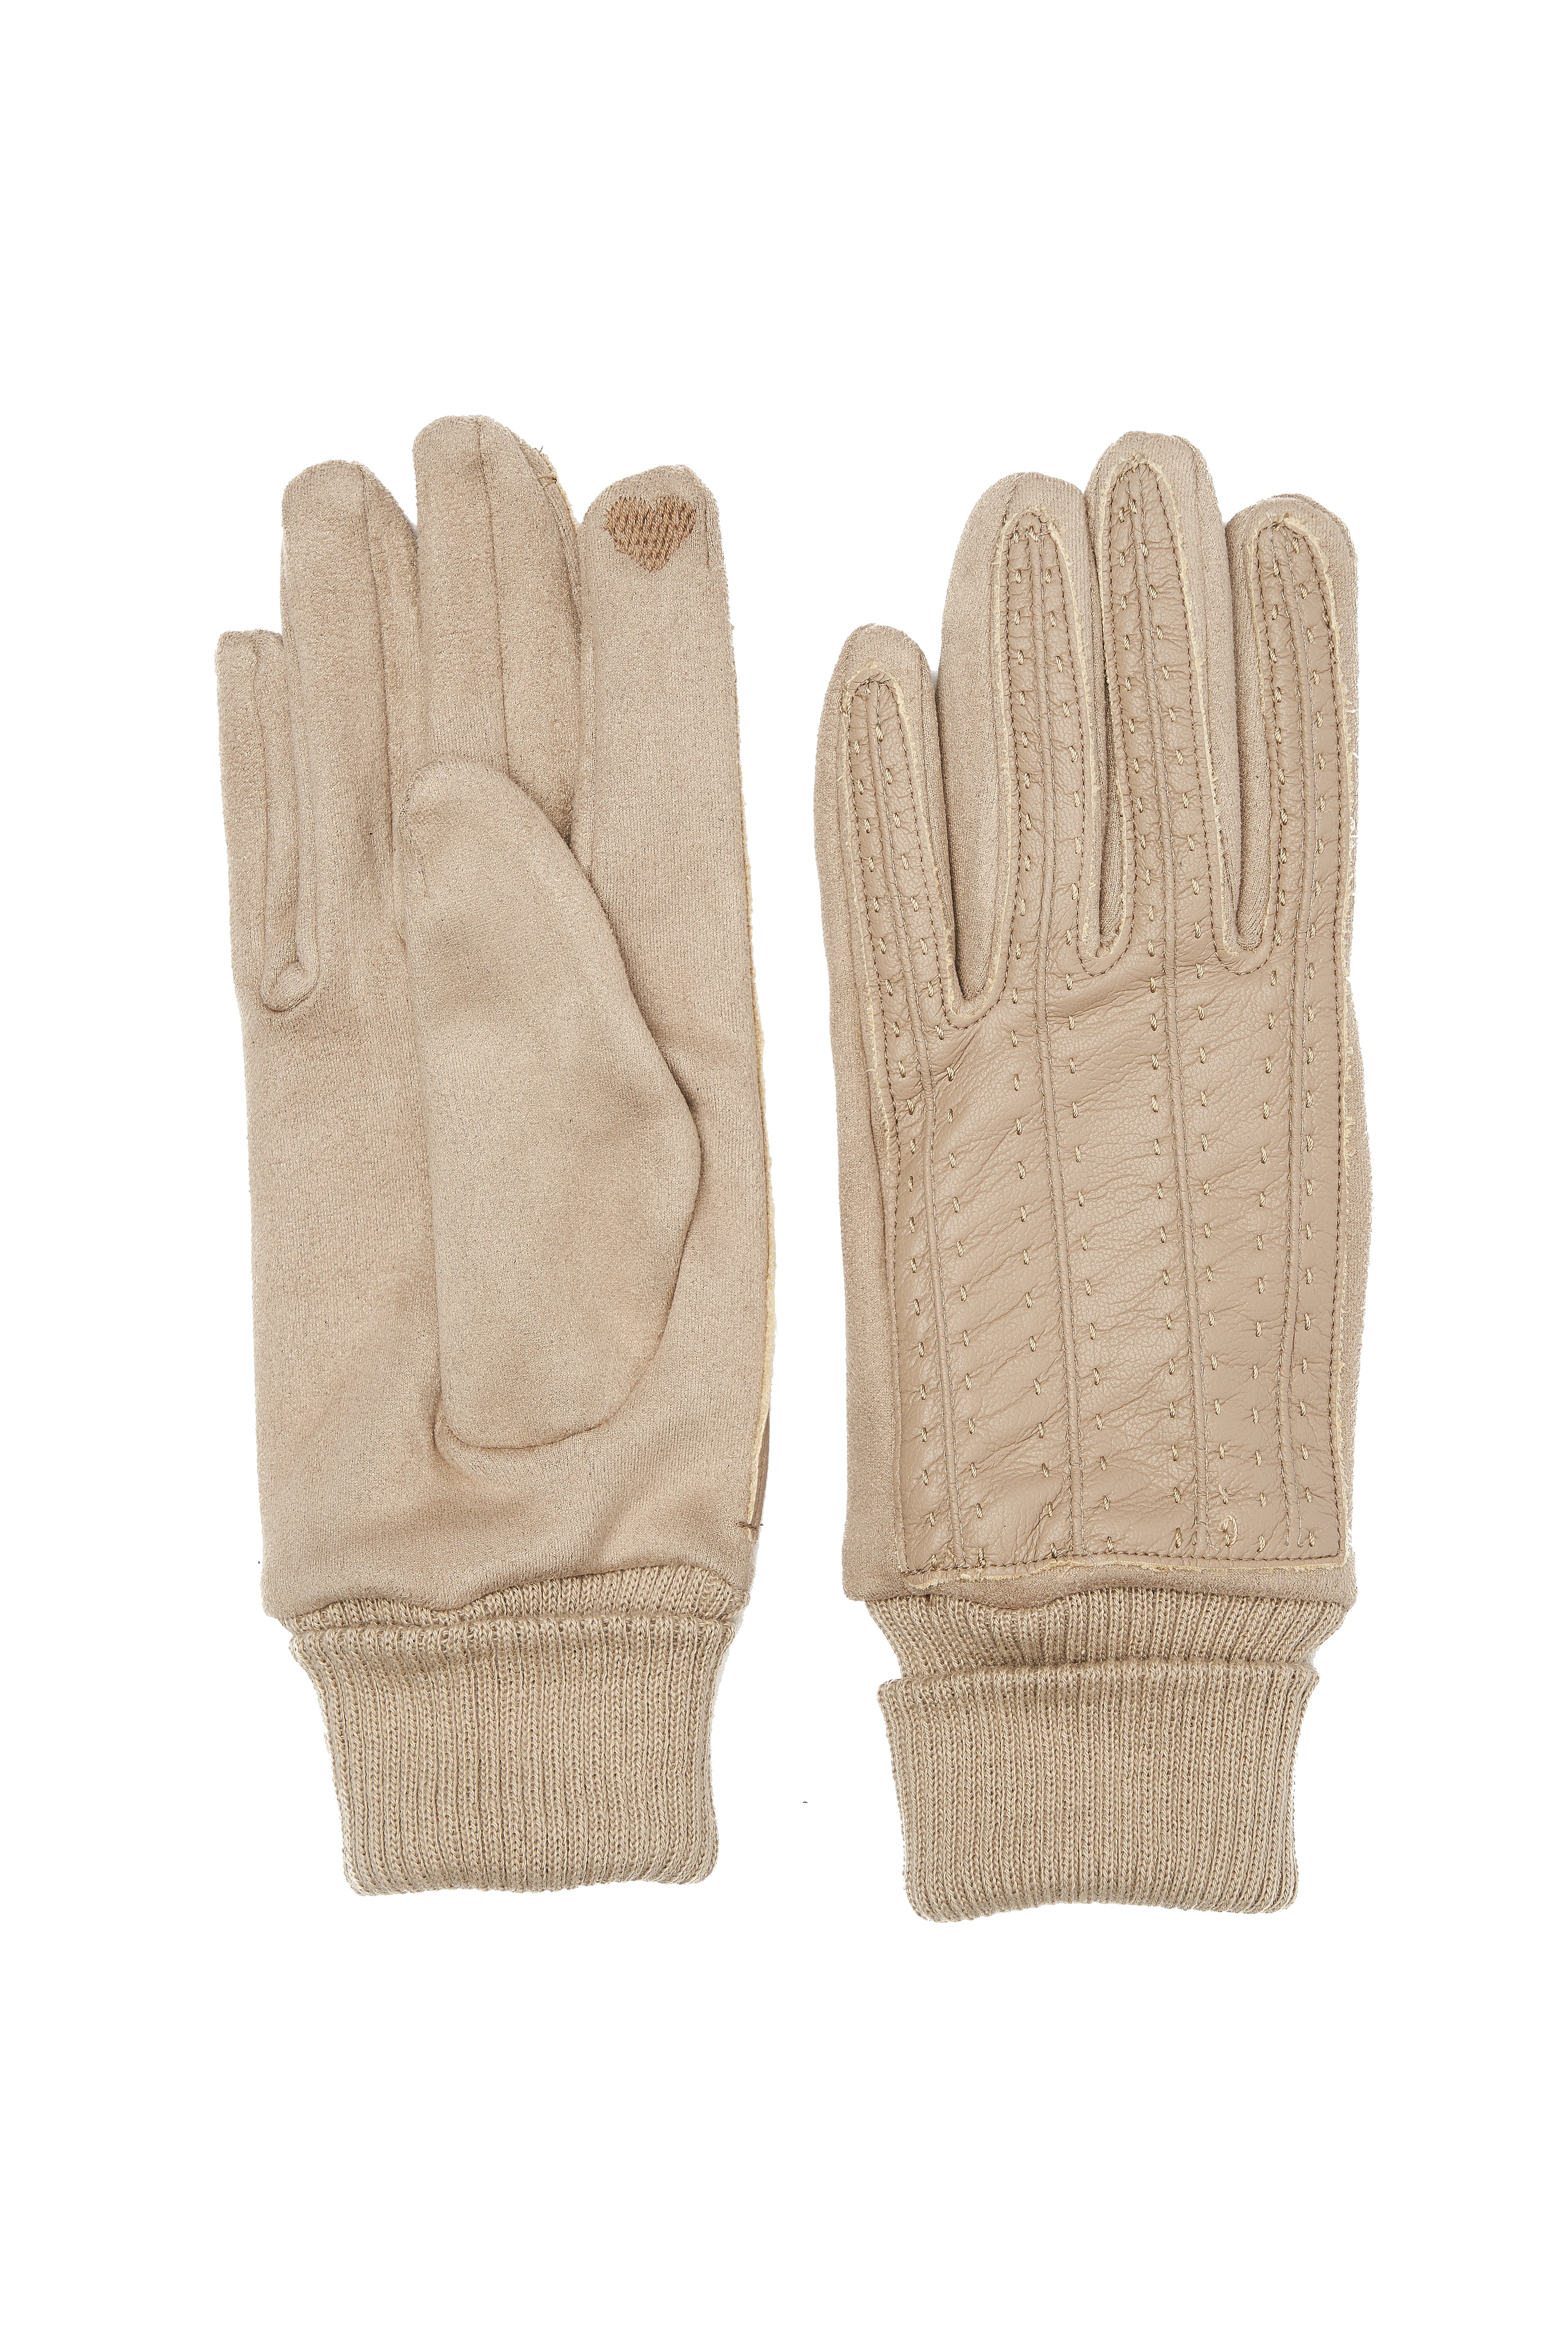 ECO LEATHER BEIGE GLOVES